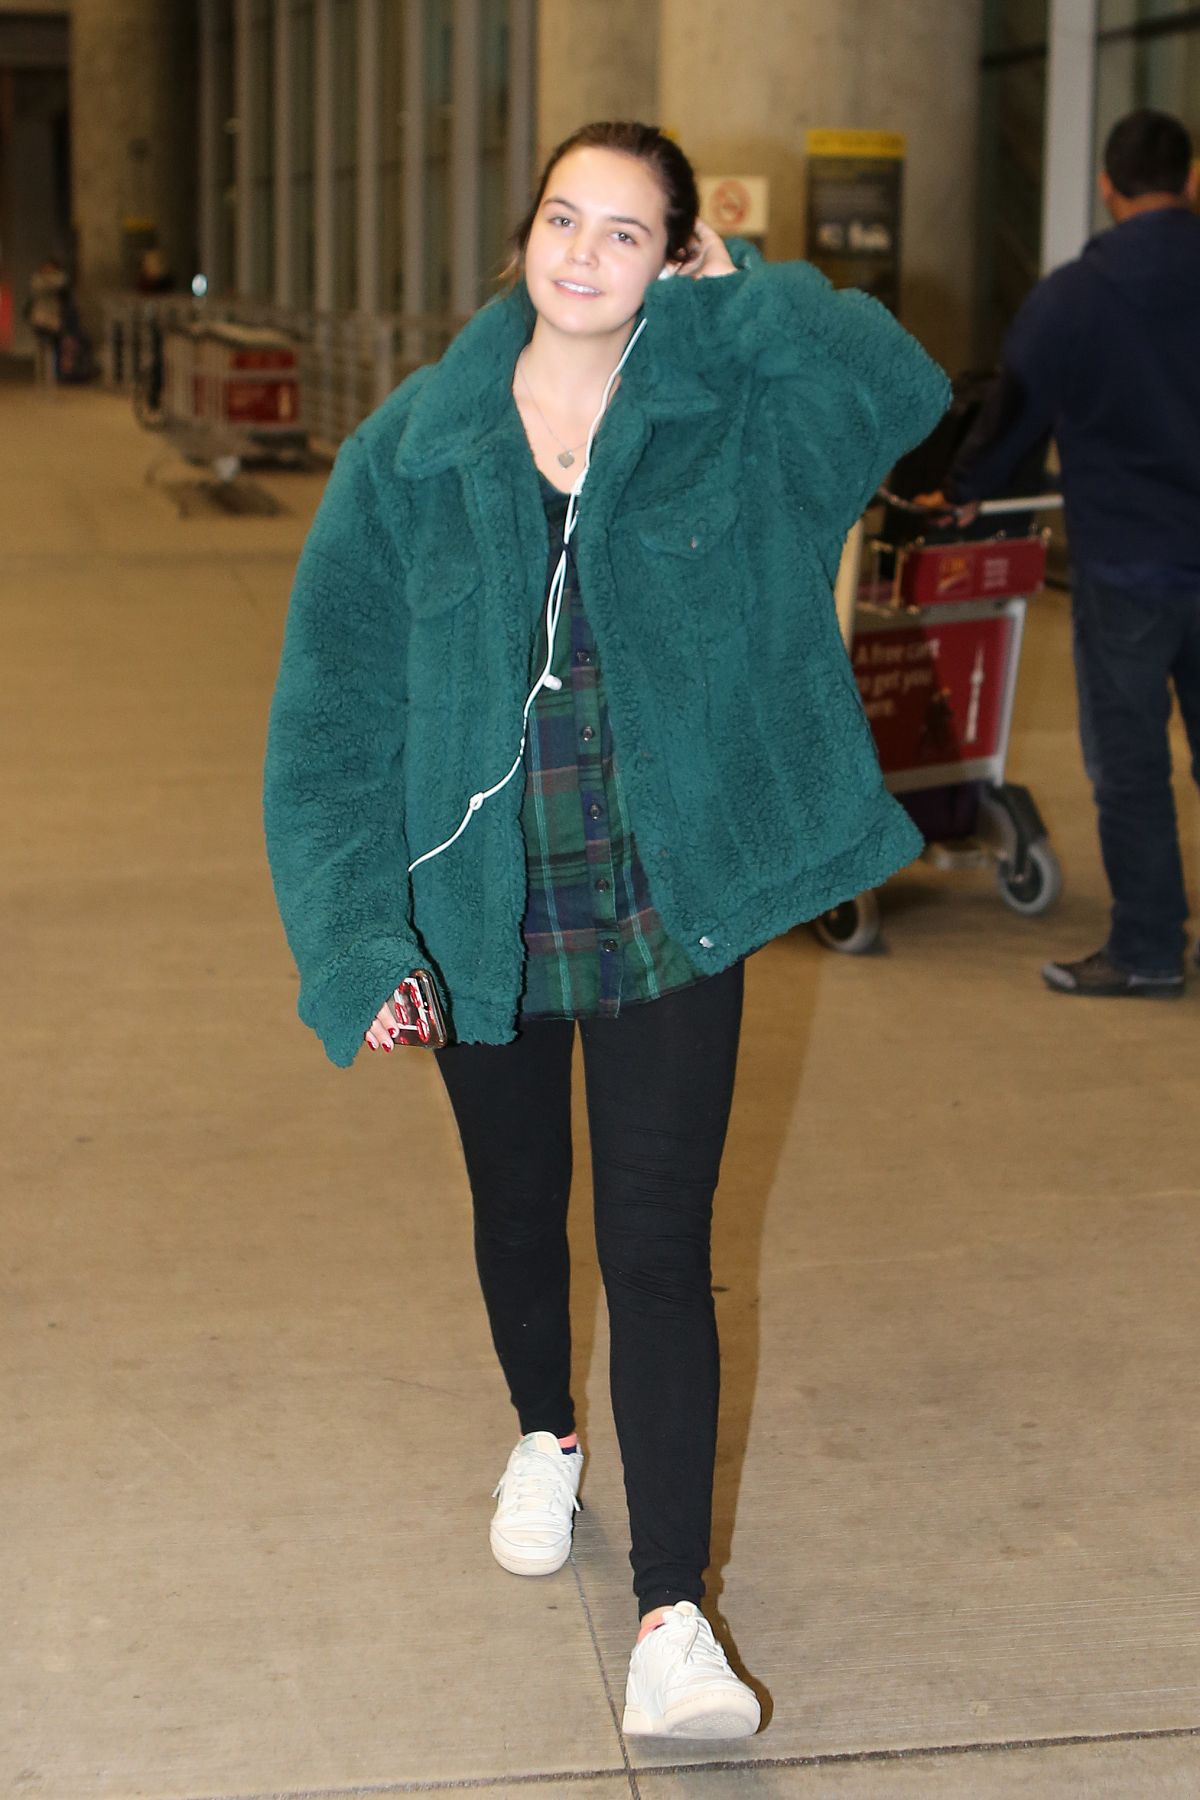 BAILEE MADISON at Pearson International Airport in Toronto 11/12/2018 ...